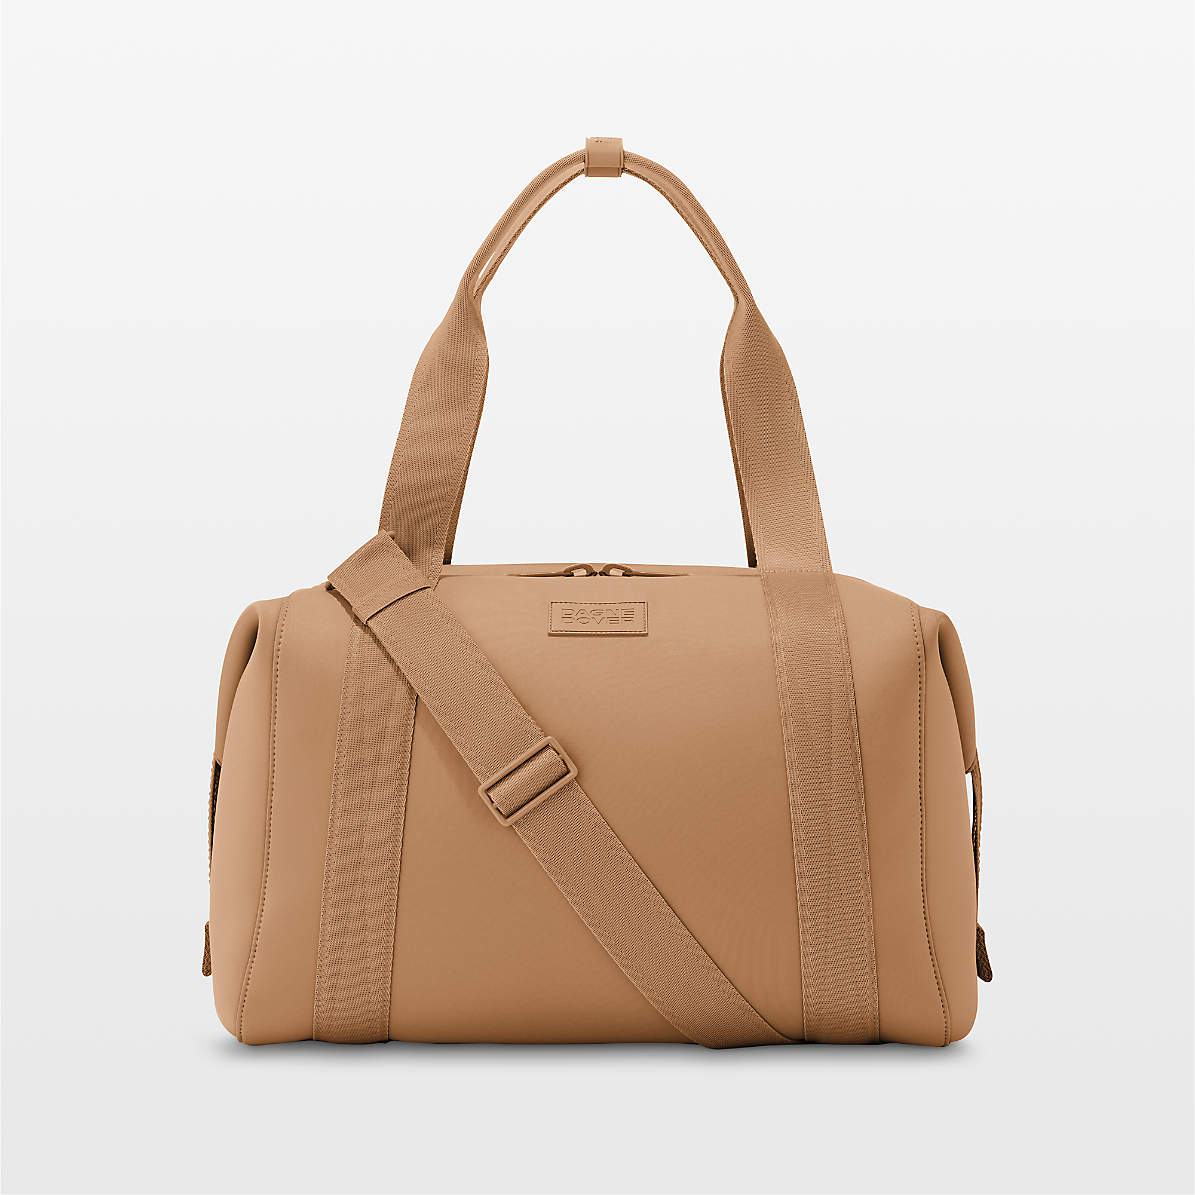 Wholesale Leather Bags Online, Carryall Bag - SAMIA